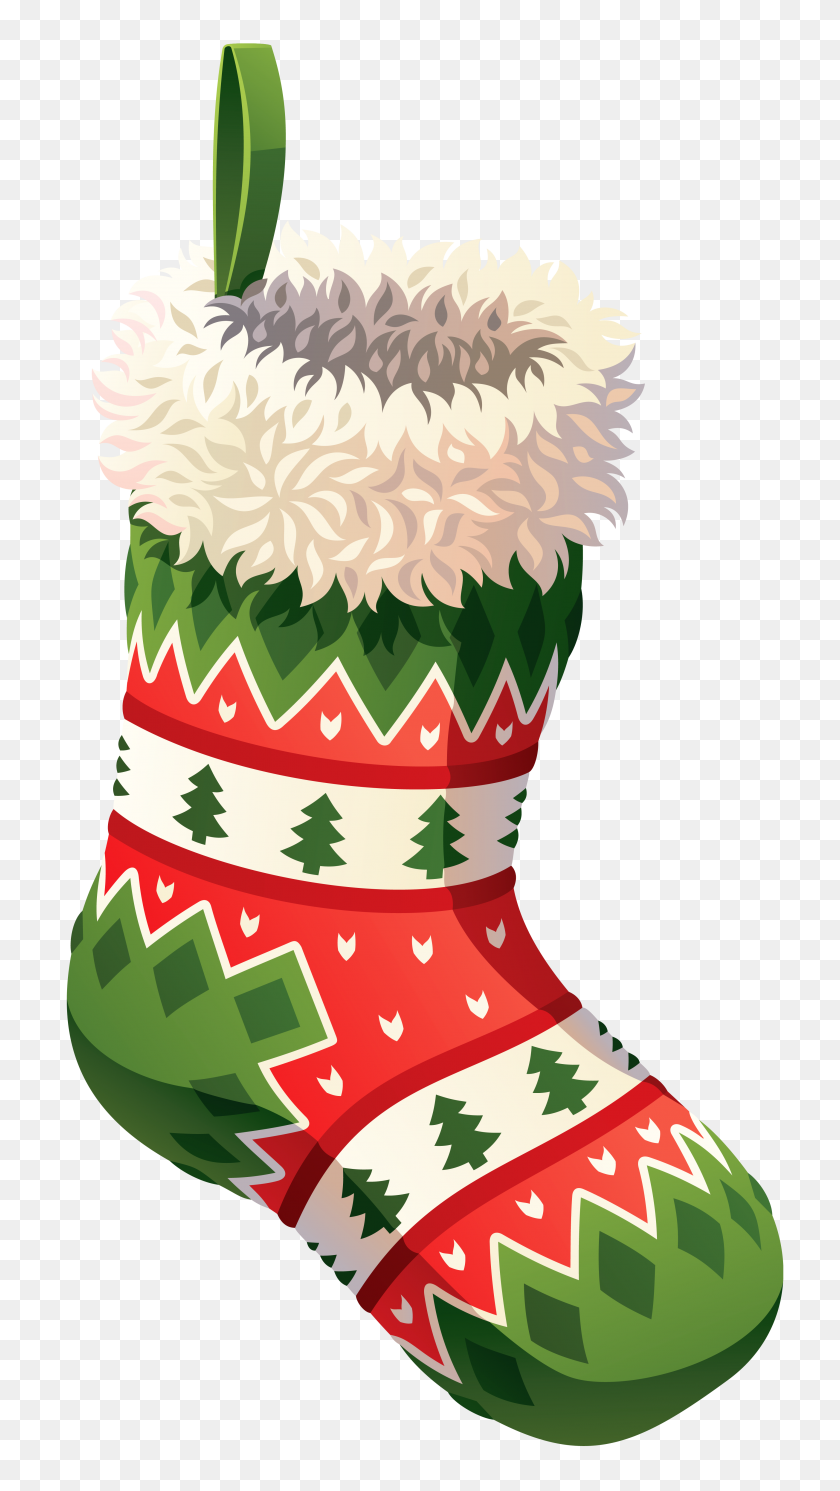 3389x6218 Christmas Stocking Png Clip Art - Free Christmas Stocking Clipart